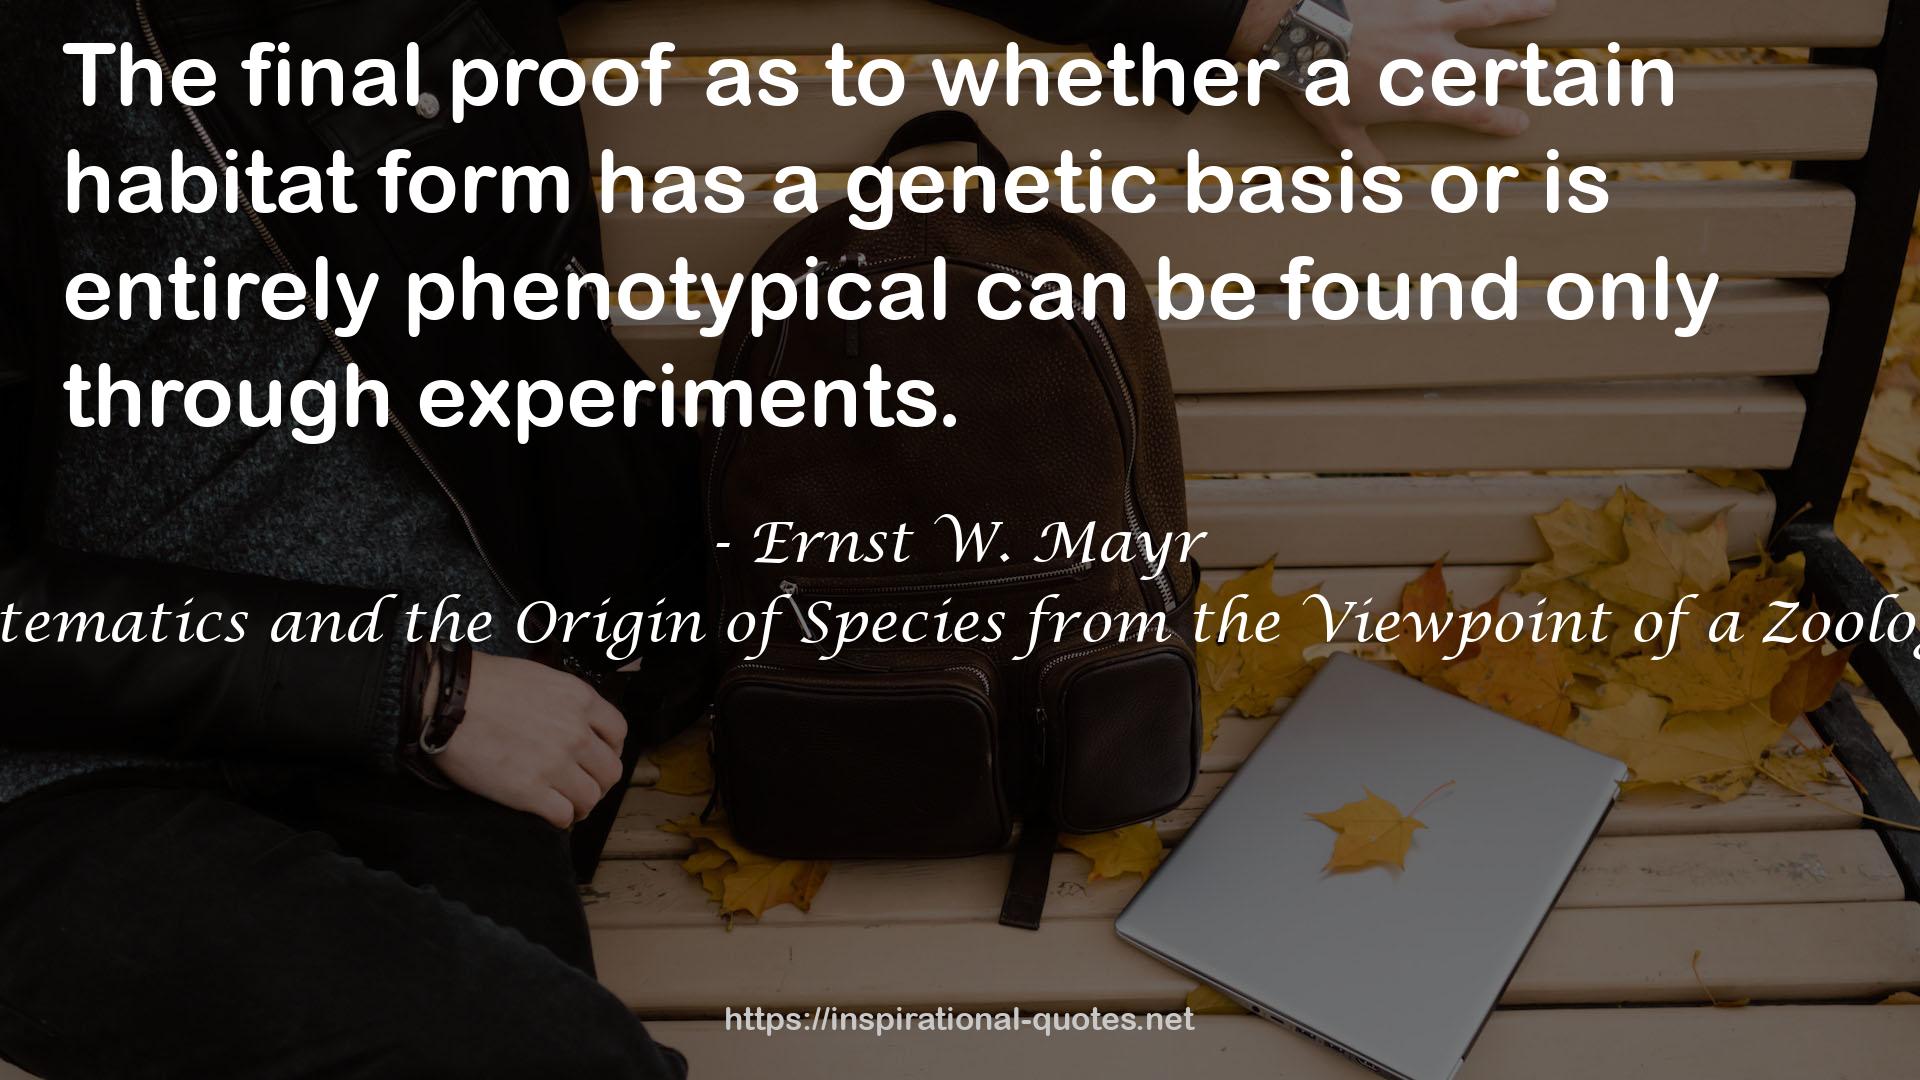 Systematics and the Origin of Species from the Viewpoint of a Zoologist QUOTES